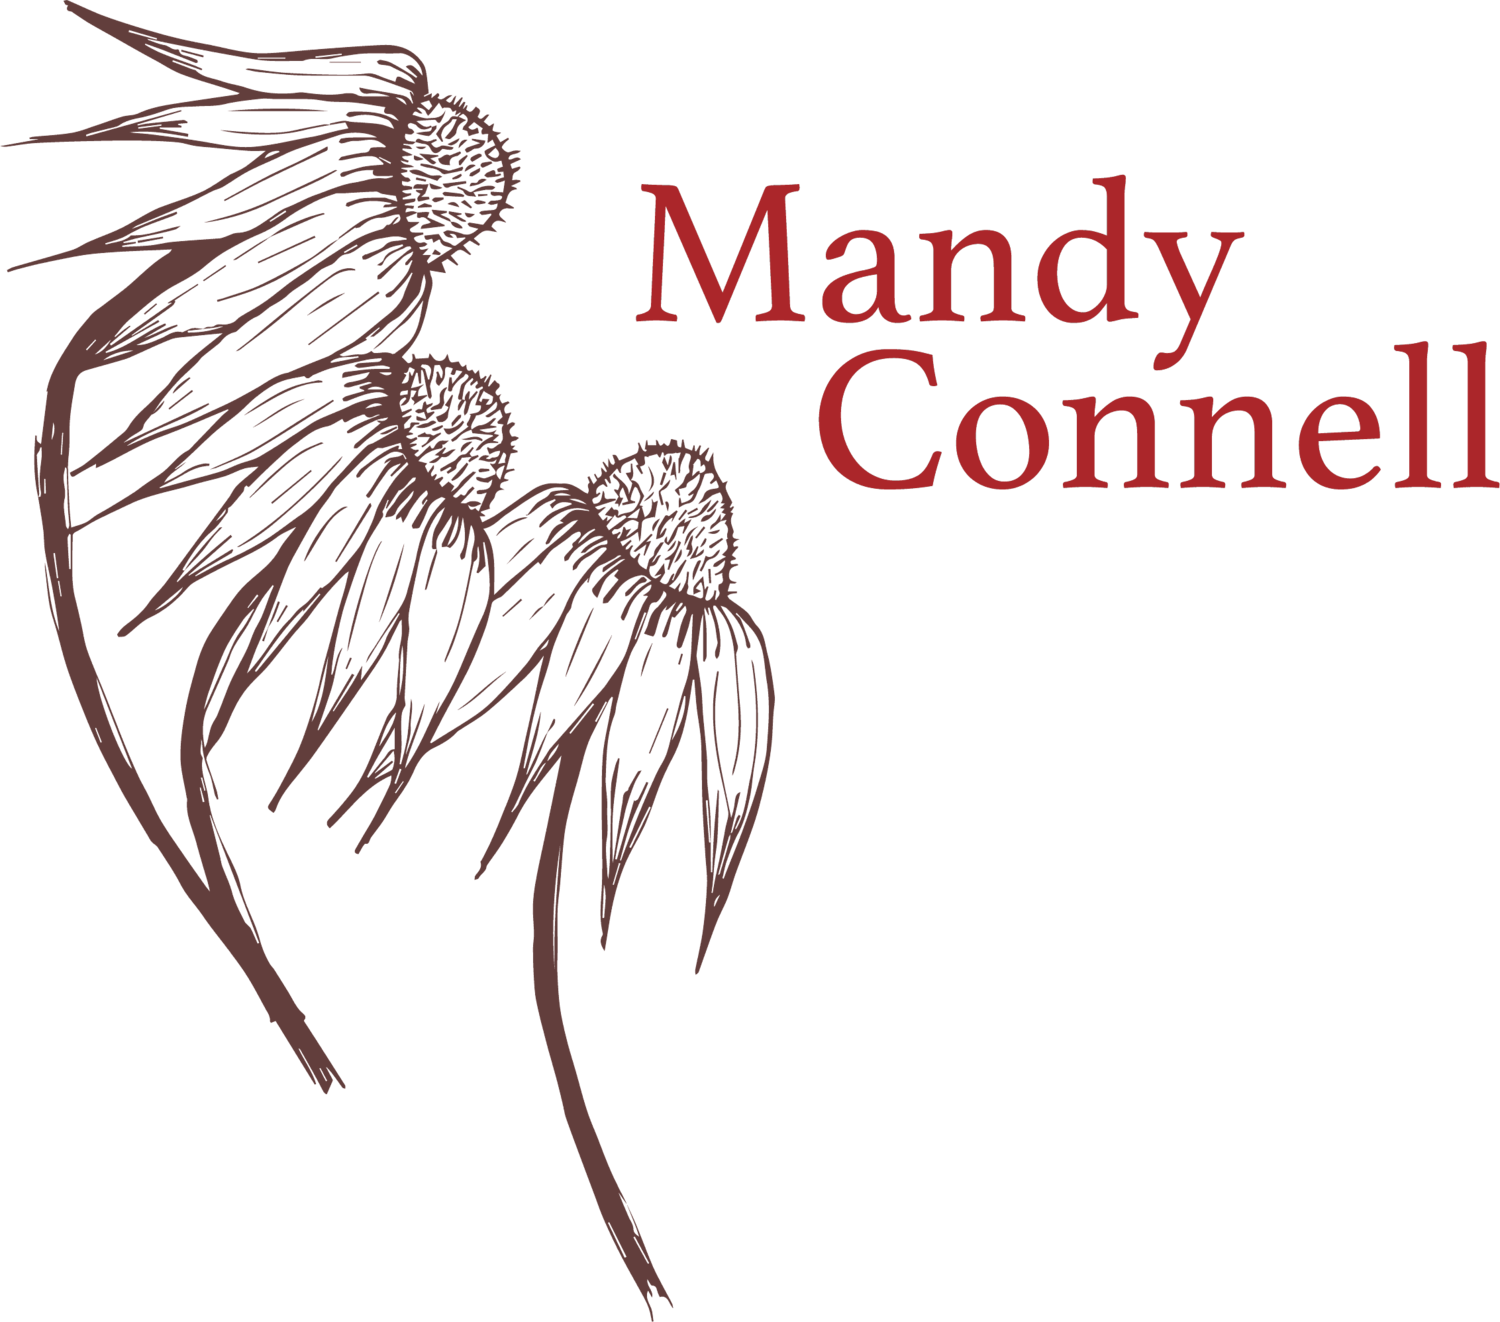 Tam lin (child 39) 12. Discography Mandy Connell